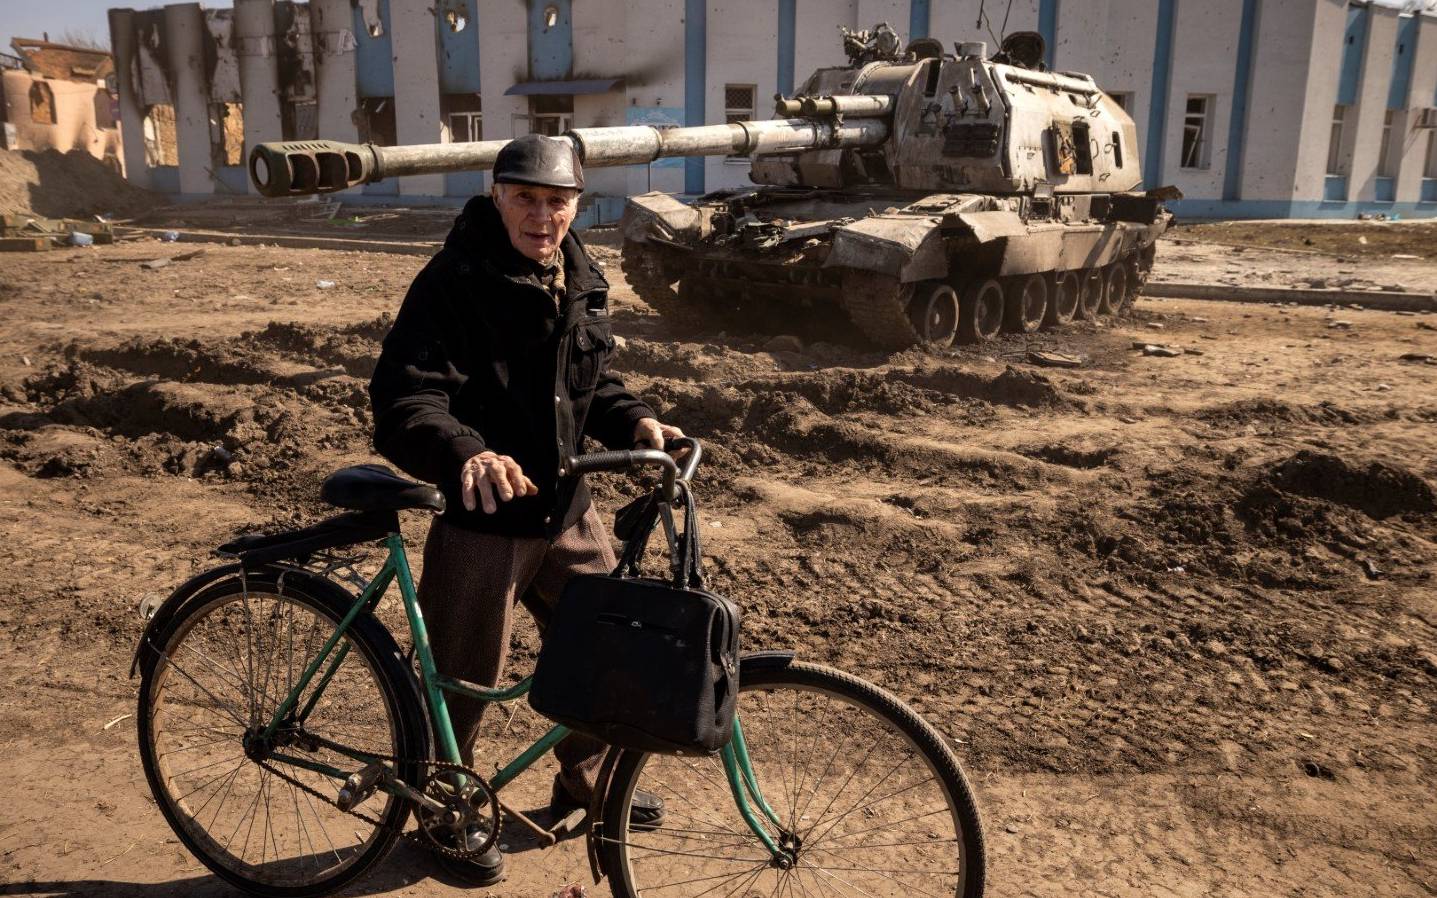 A cyclist pushes his bike near a damaged armored vehicle in the northeastern city of Trostianets, on March 29, 2022. - Ukraine said on March 26, 2022 its forces had recaptured the town of Trostianets, near the Russian border, one of the first towns to fall under Moscow's control in its month-long invasion. (Photo by FADEL SENNA / AFP)